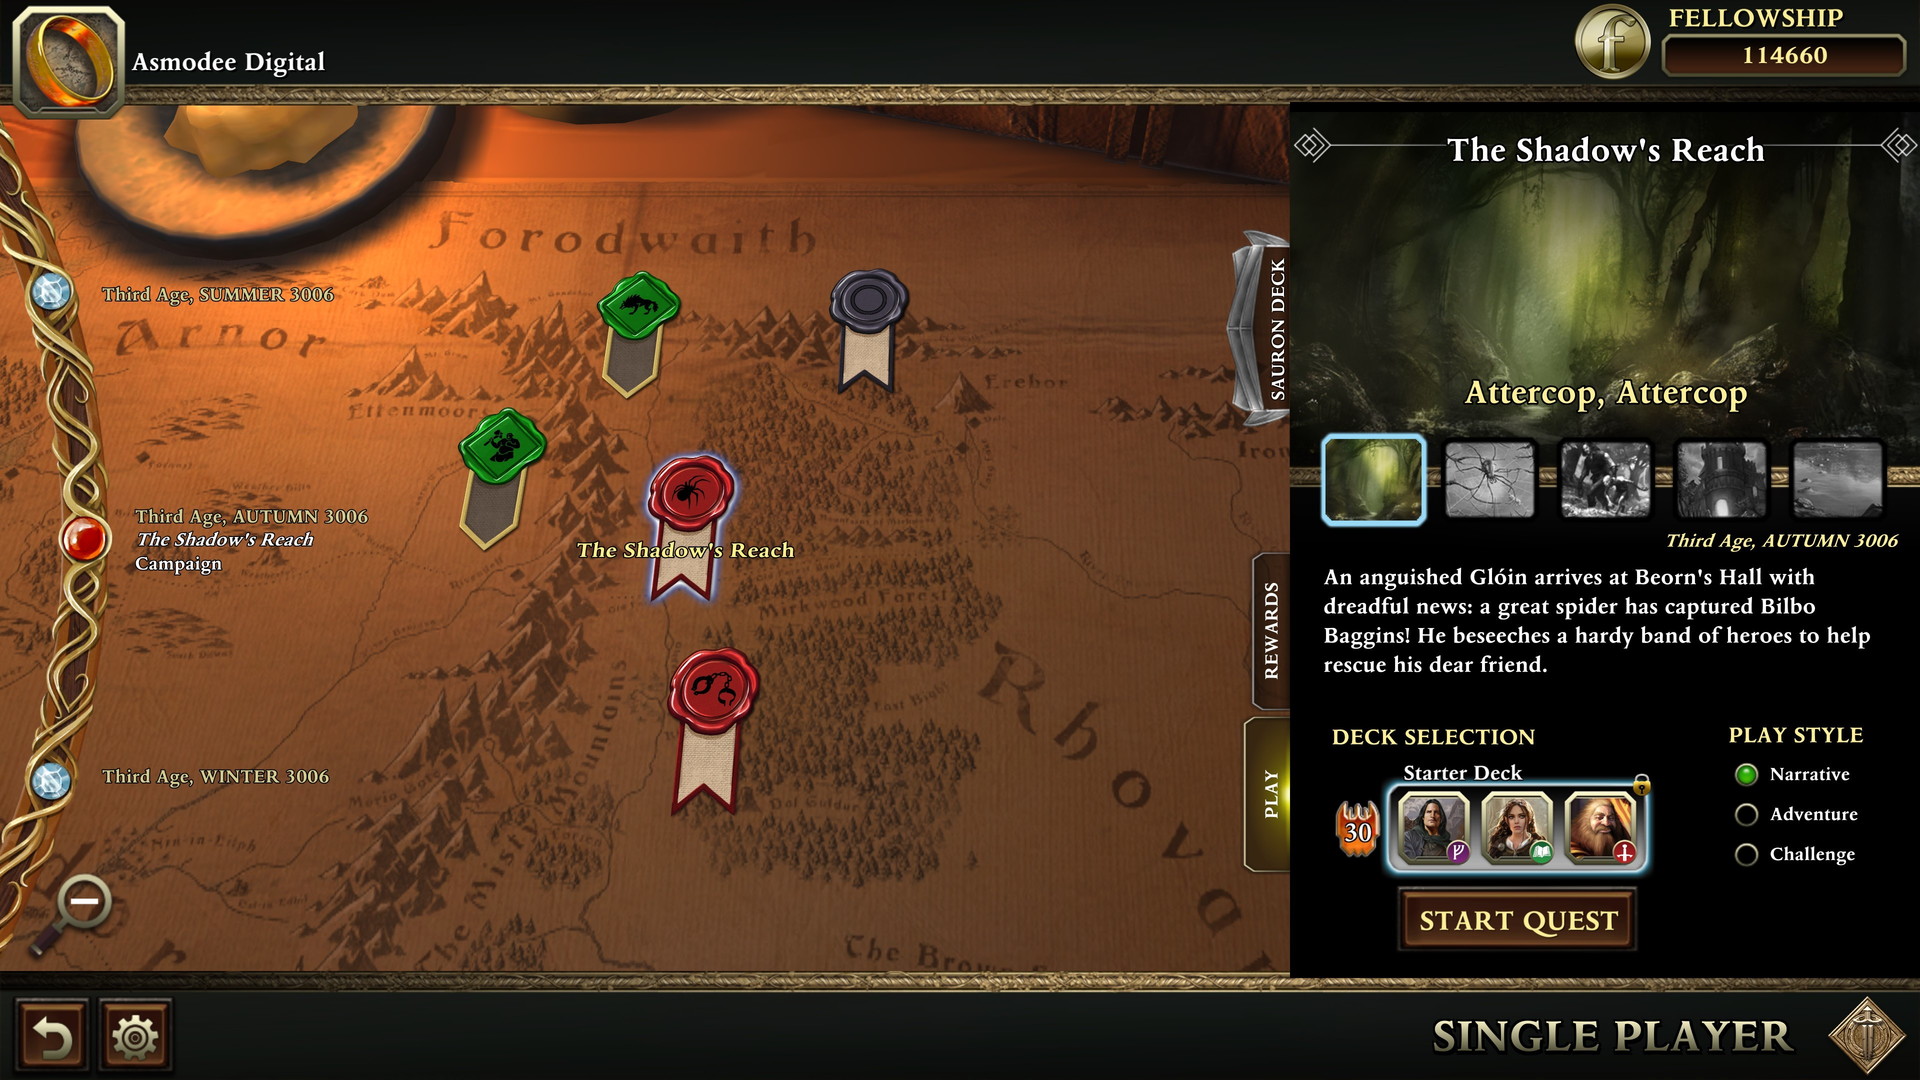 The Lord of the Rings: Adventure Card Game - screenshot 8